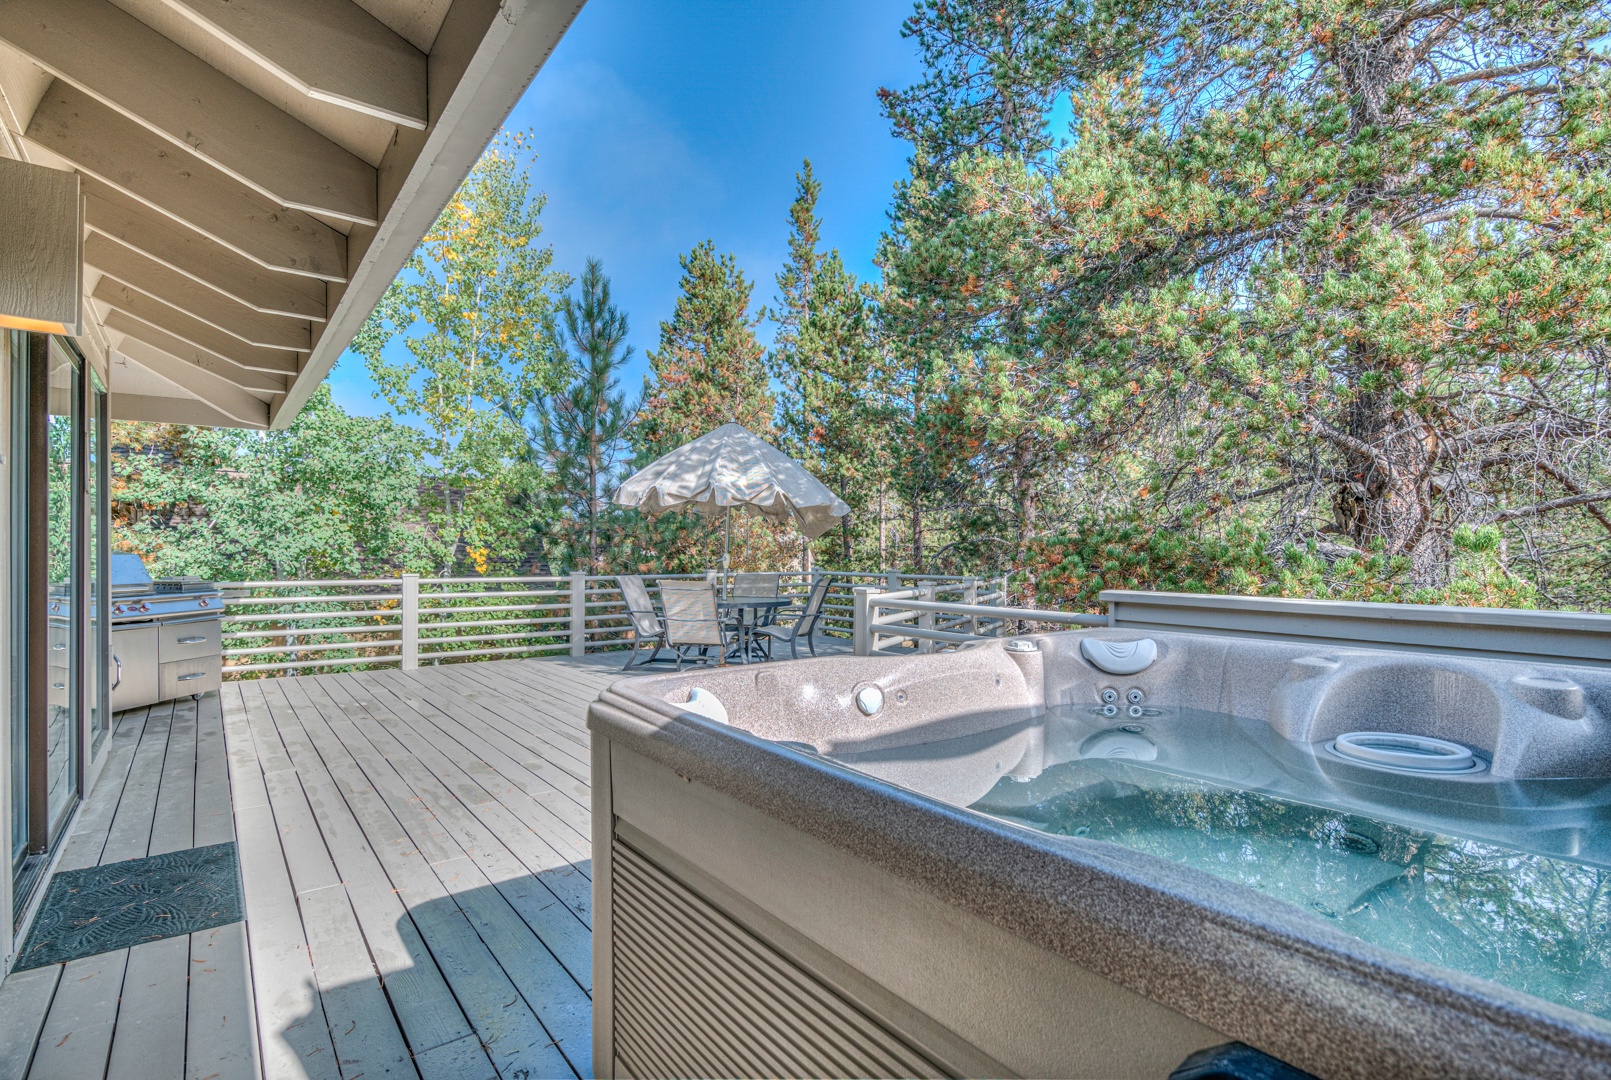 Exterior back deck with Private Hot tub